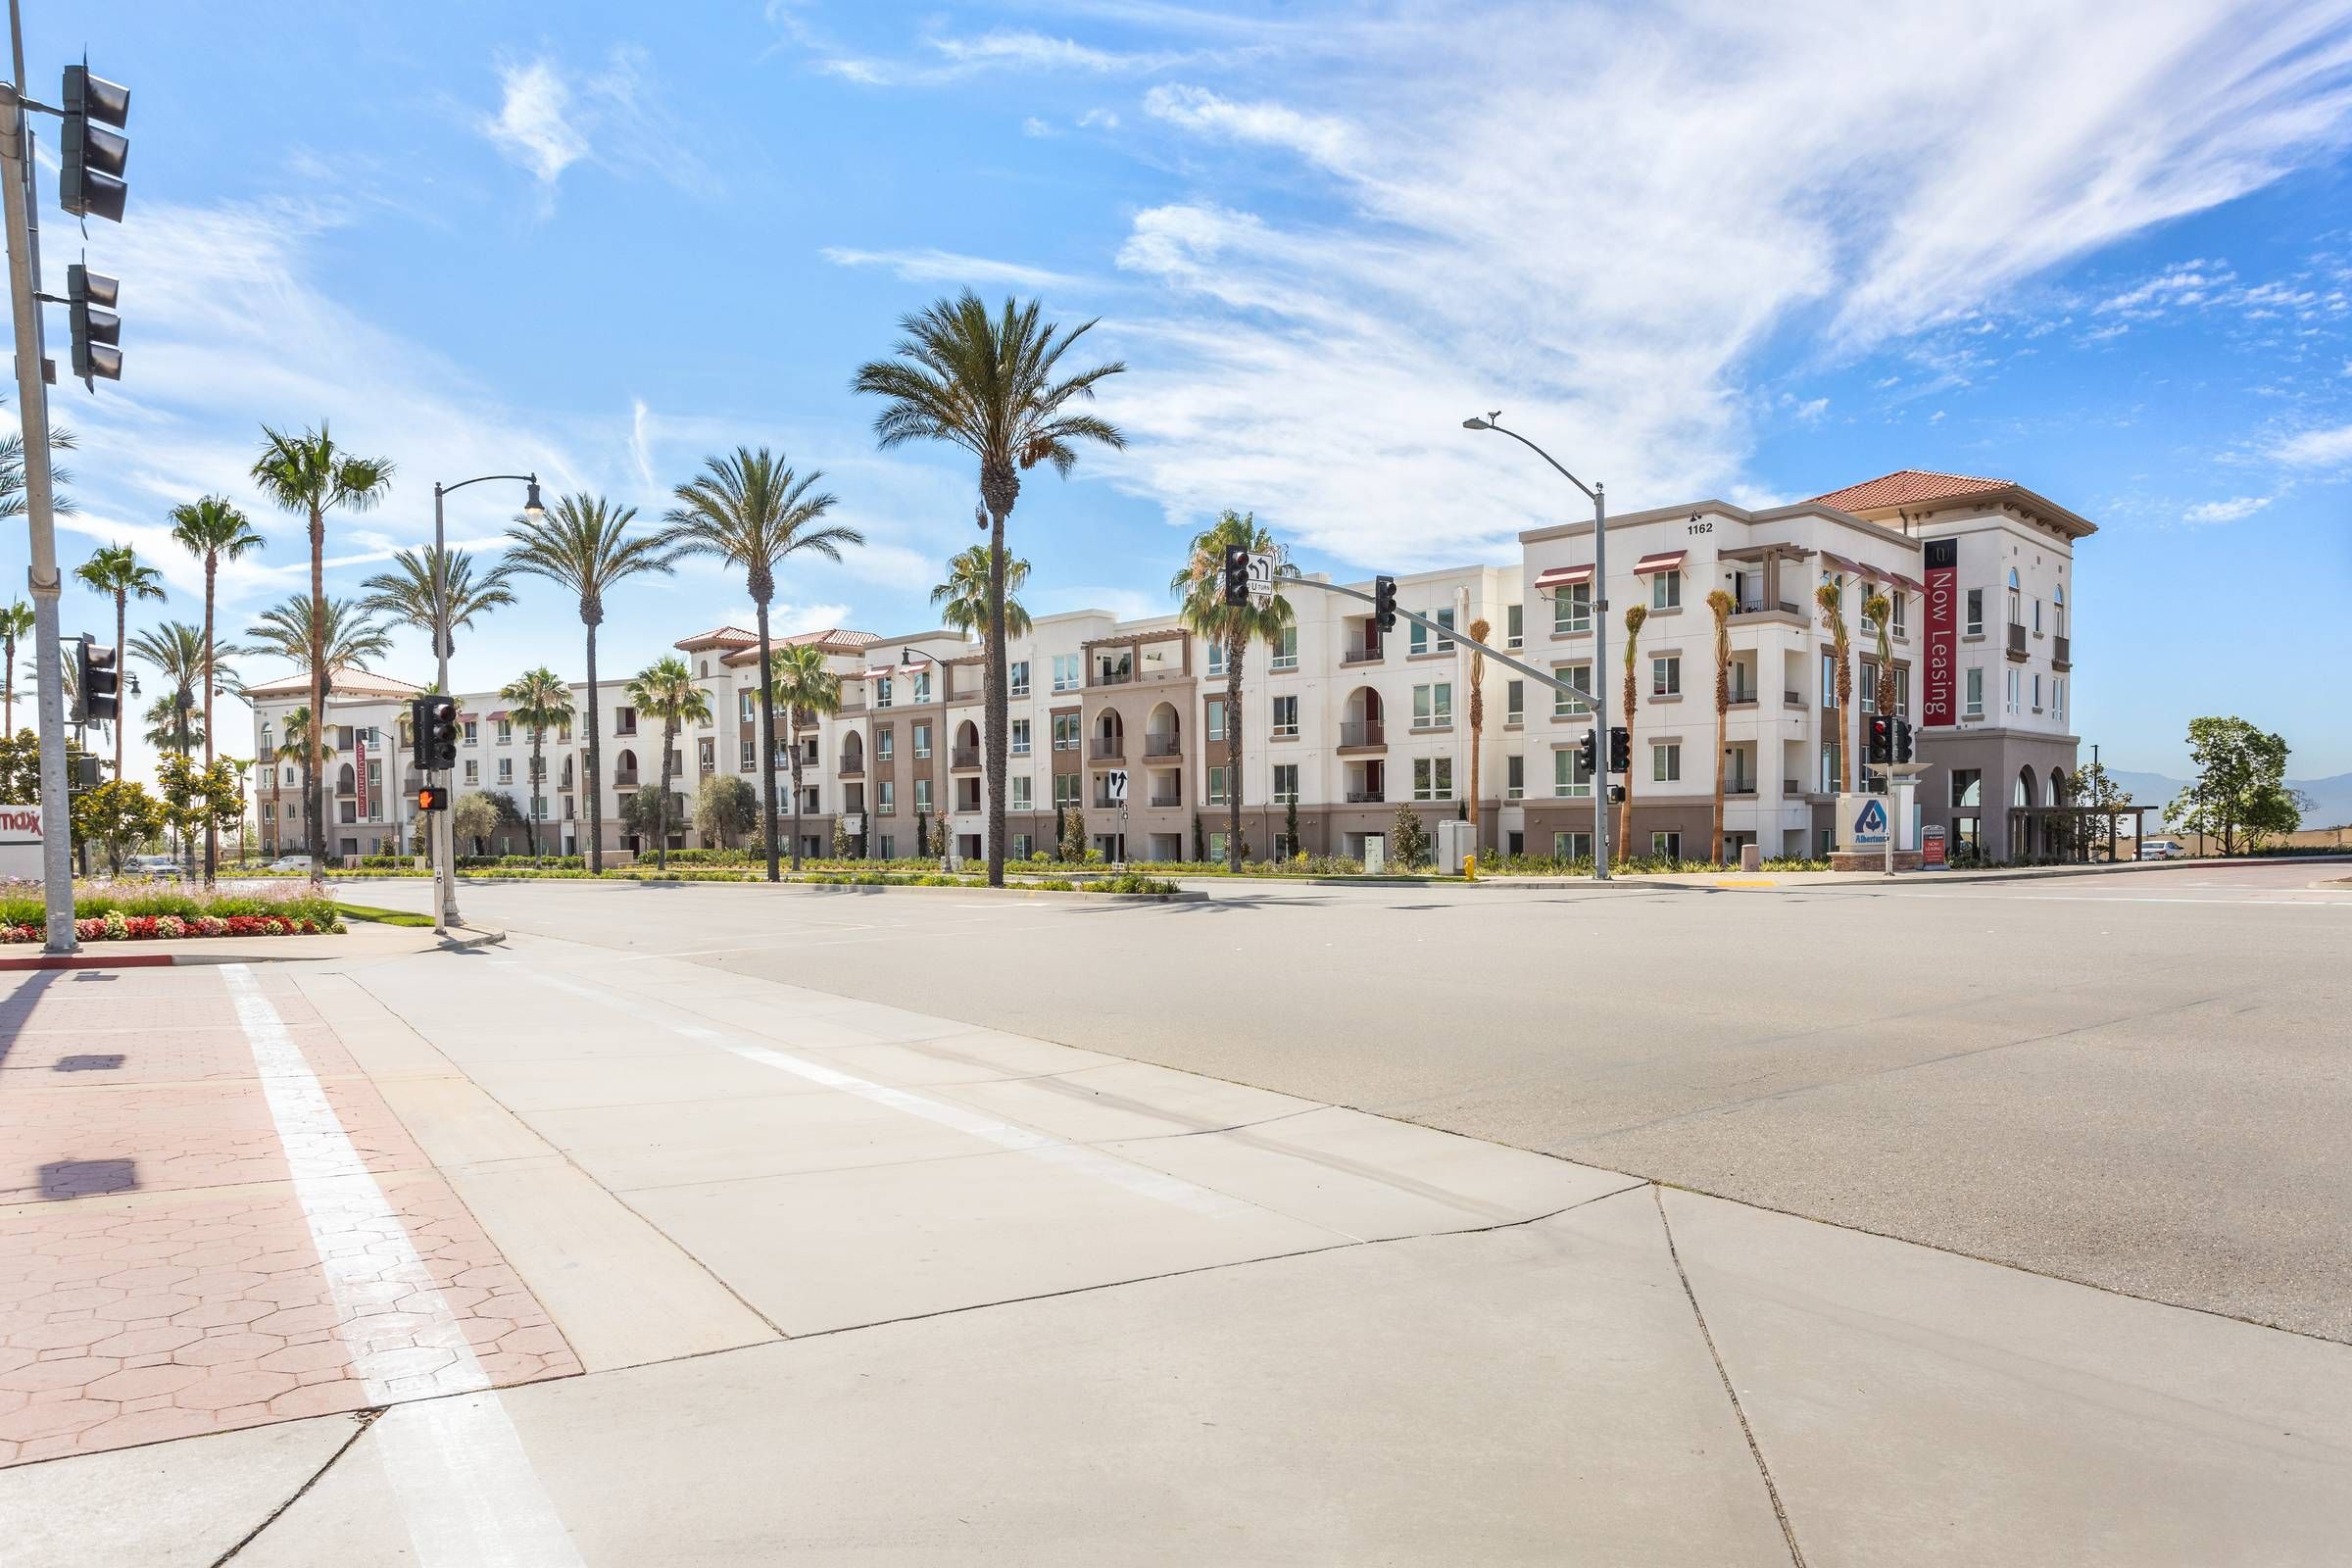 A grand exterior view of Alta Upland showcasing its Mediterranean-inspired architecture, flanked by palm trees under a blue sky.